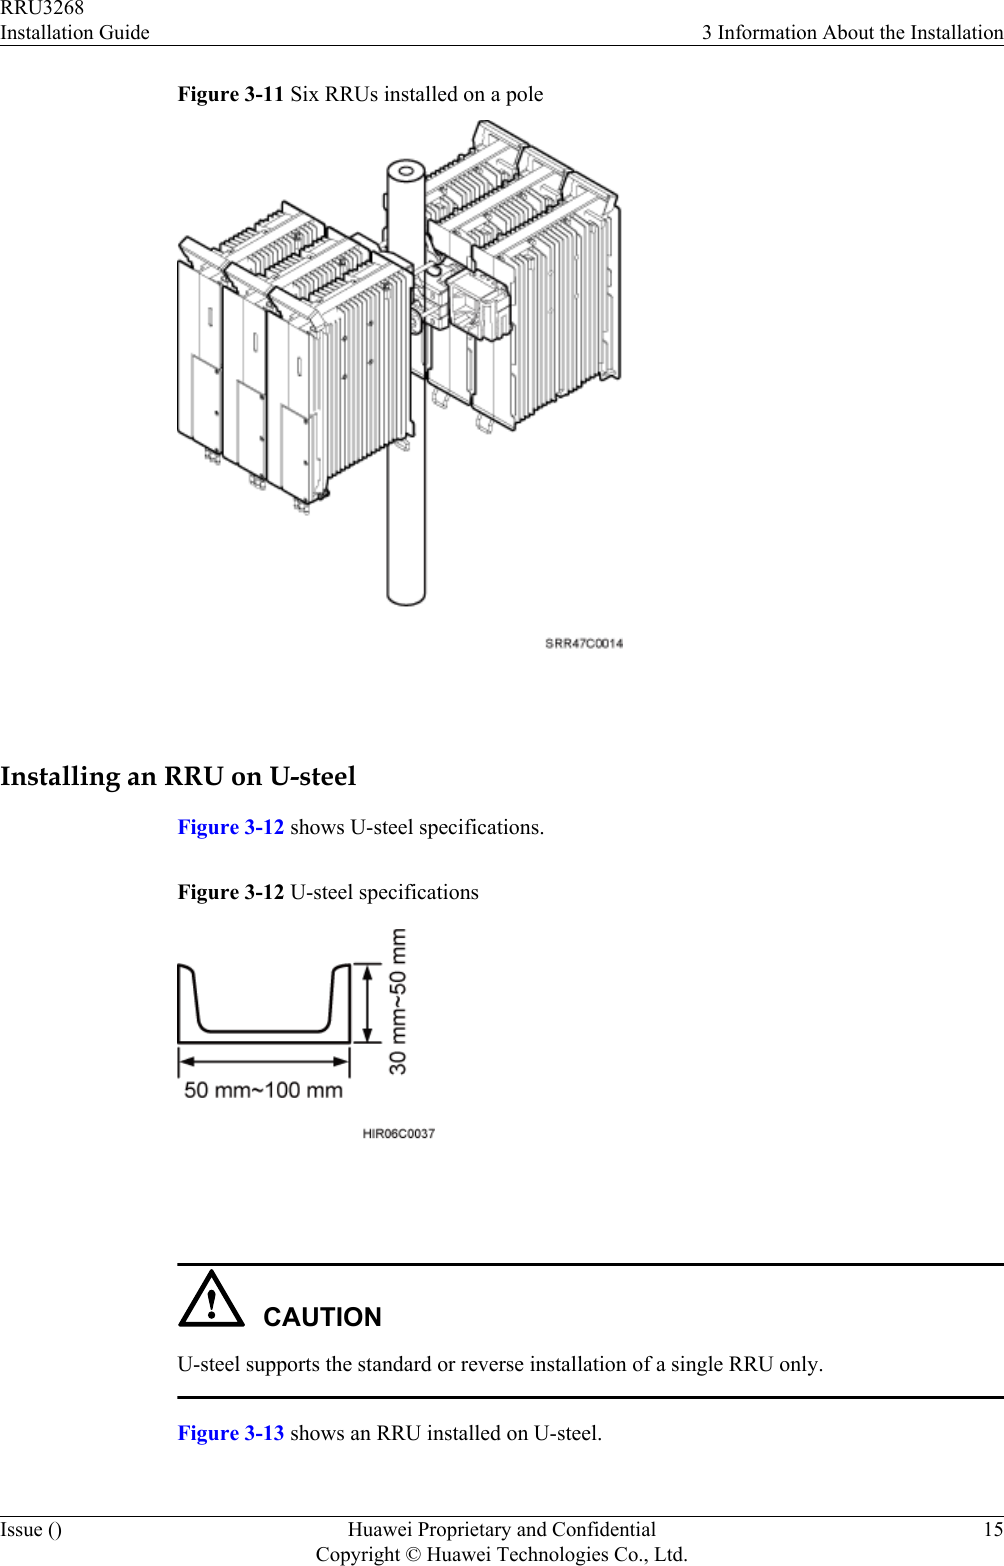 Figure 3-11 Six RRUs installed on a pole Installing an RRU on U-steelFigure 3-12 shows U-steel specifications.Figure 3-12 U-steel specifications CAUTIONU-steel supports the standard or reverse installation of a single RRU only.Figure 3-13 shows an RRU installed on U-steel.RRU3268Installation Guide 3 Information About the InstallationIssue () Huawei Proprietary and ConfidentialCopyright © Huawei Technologies Co., Ltd.15